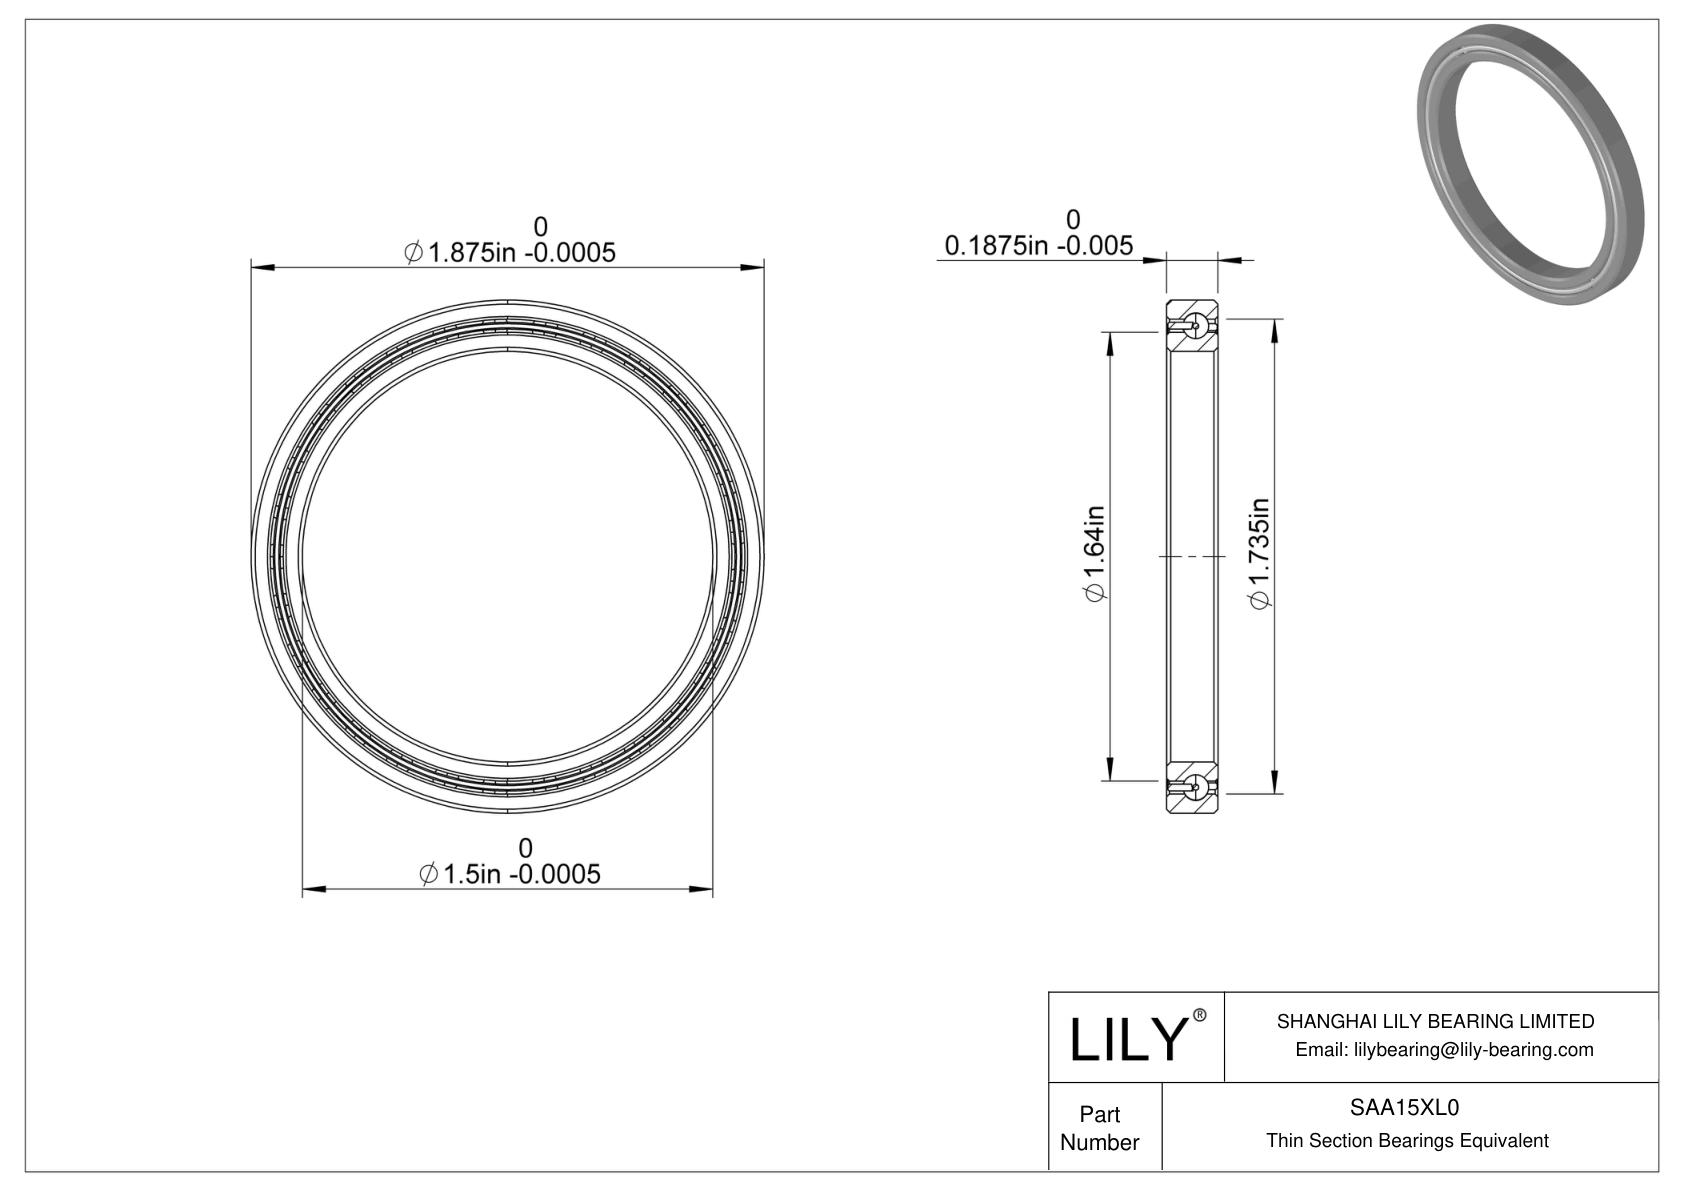 SAA15XL0 Constant Section (CS) Bearings cad drawing